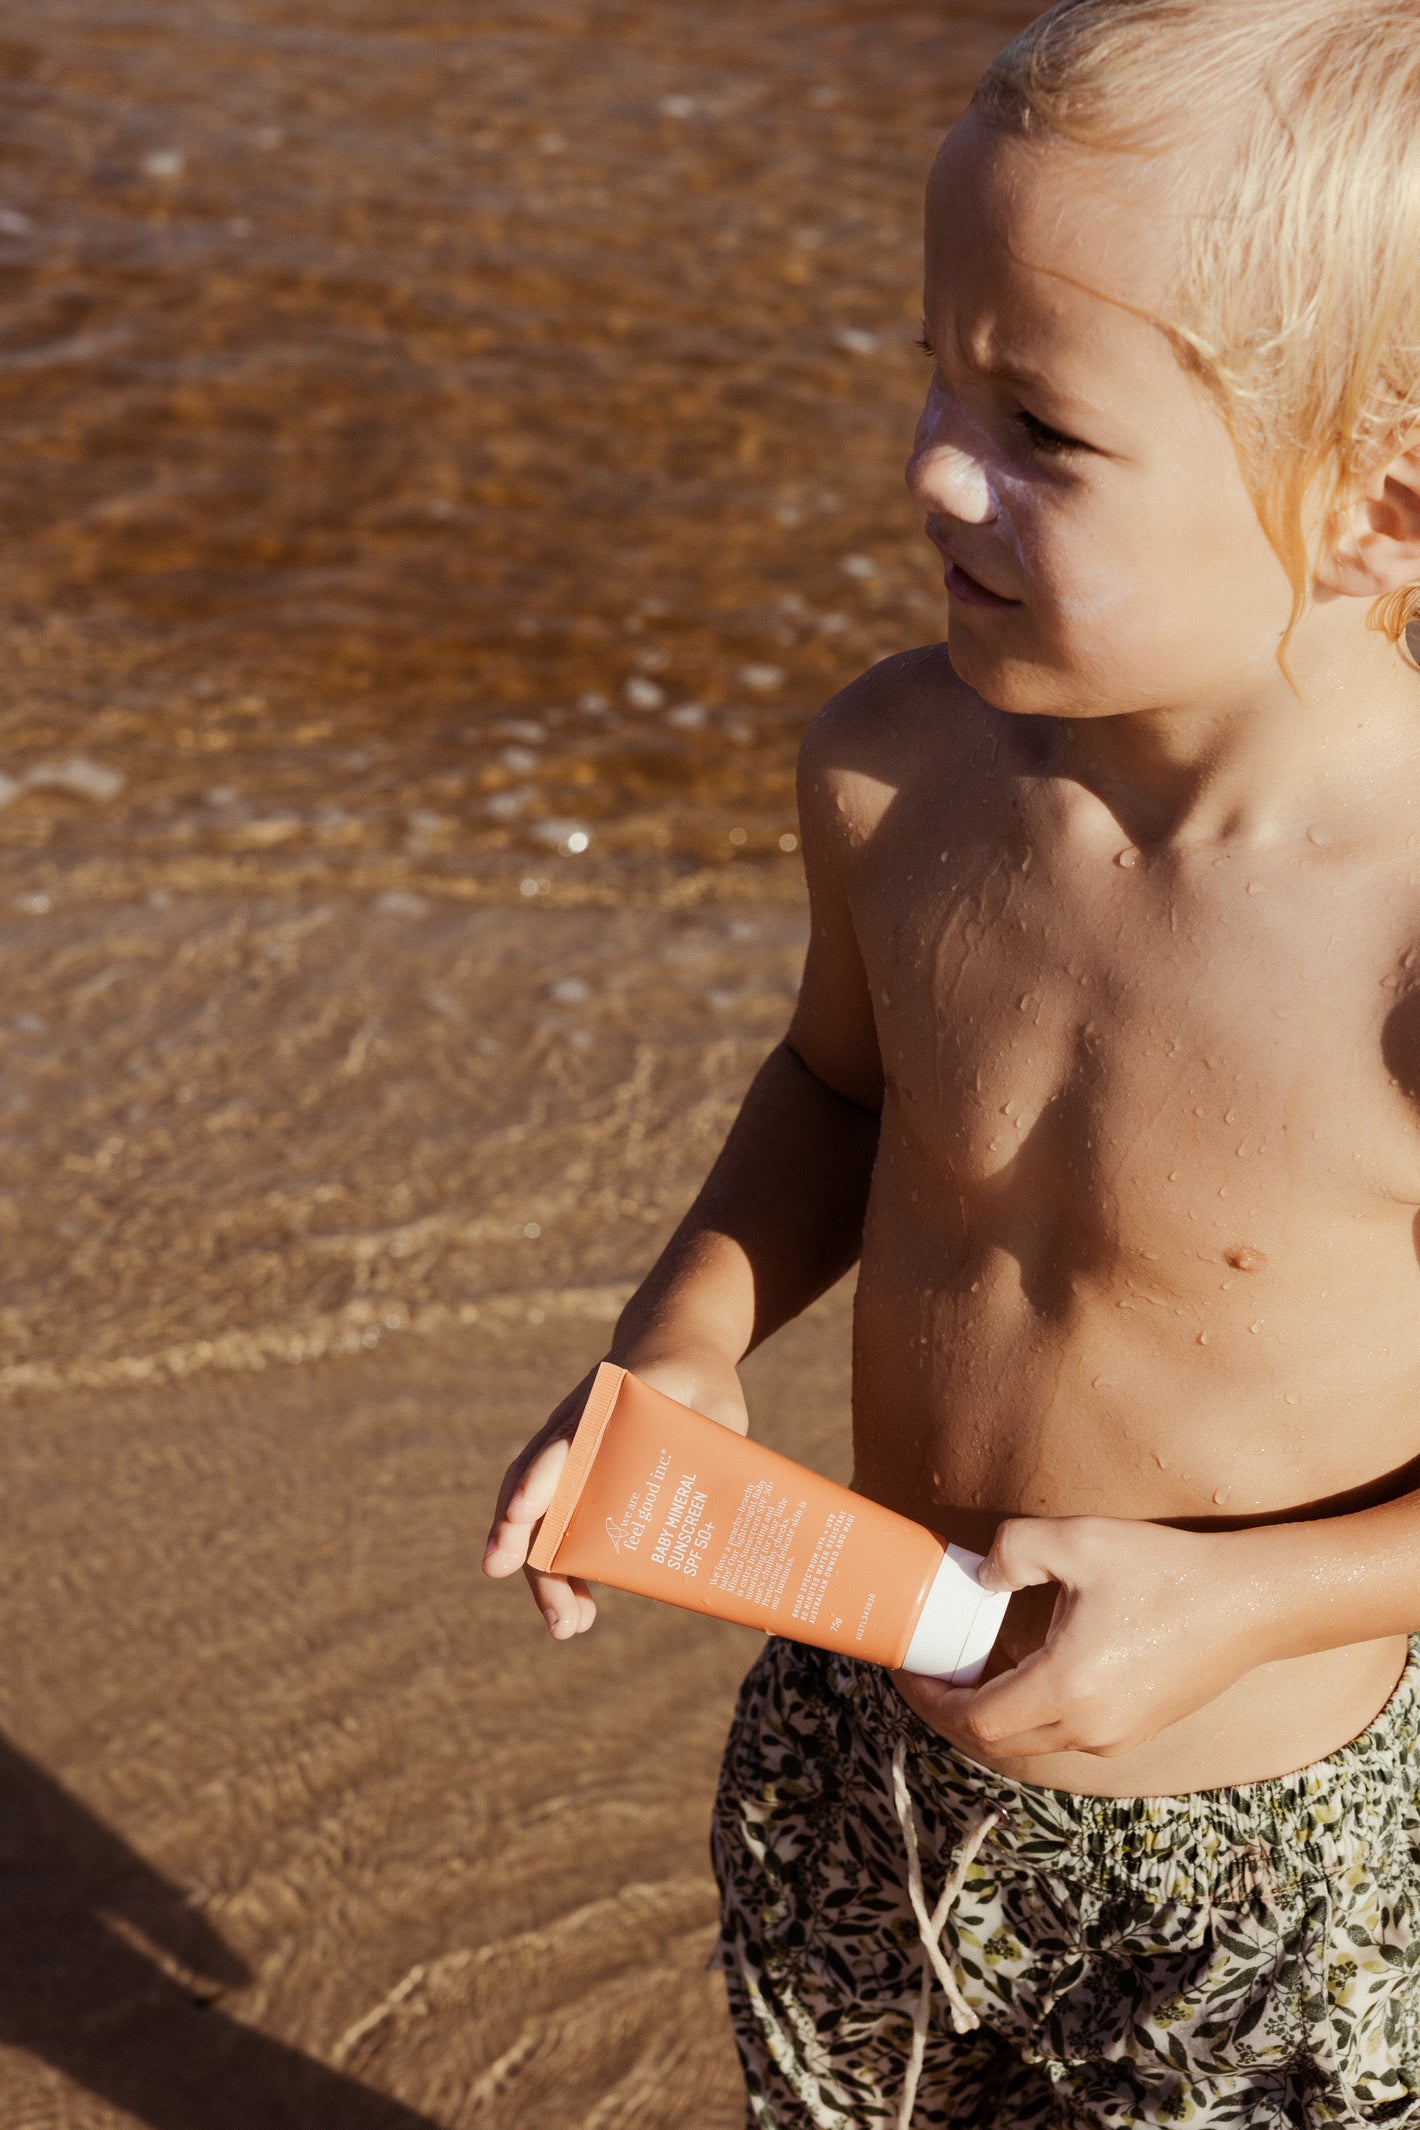 A young child on a sandy beach holding an a tube of We Are Feel Good Inc. Baby Mineral Sunscreen spf50+, with the ocean water lapping near their feet.